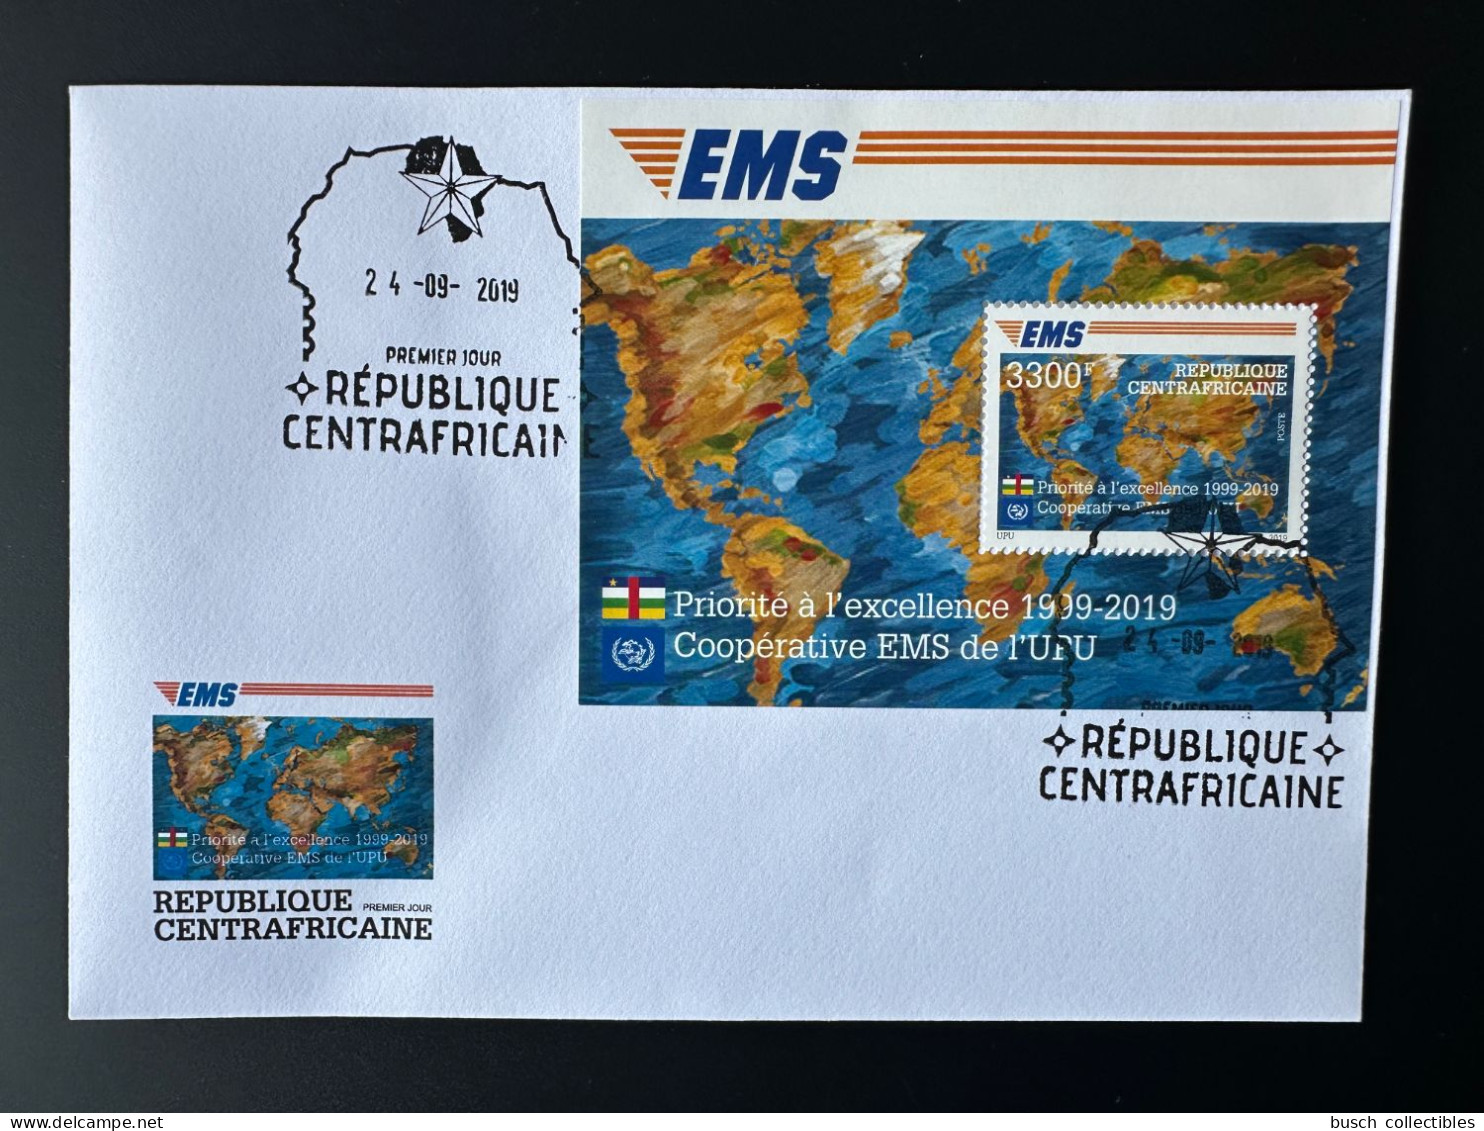 Central Africa Centrafrique 2019 FDC 1er Jour Mi. Bl. 2000 S/S Joint Issue EMS 20 Years Emission Commune E.M.S. UPU - Emisiones Comunes